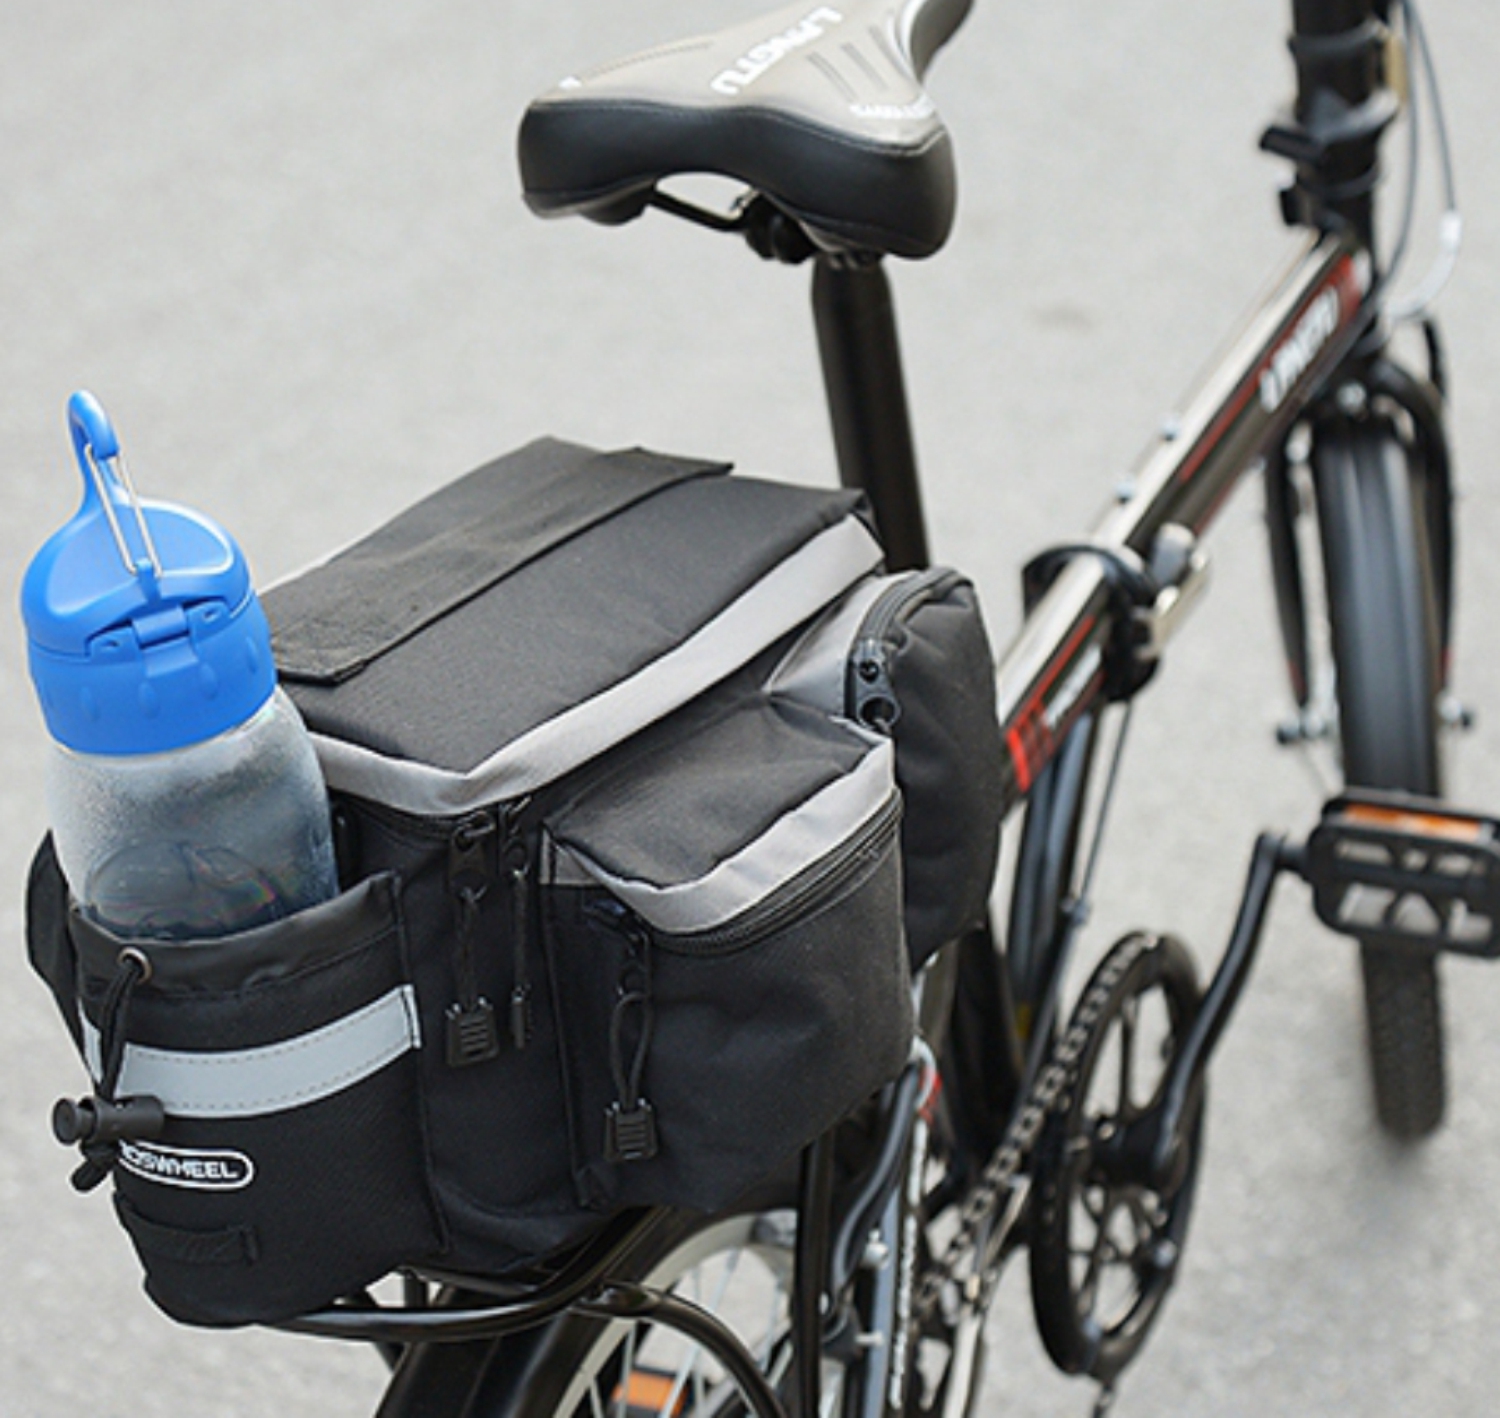 Includes shoulder strap for convenient carrying when you are not bicycling